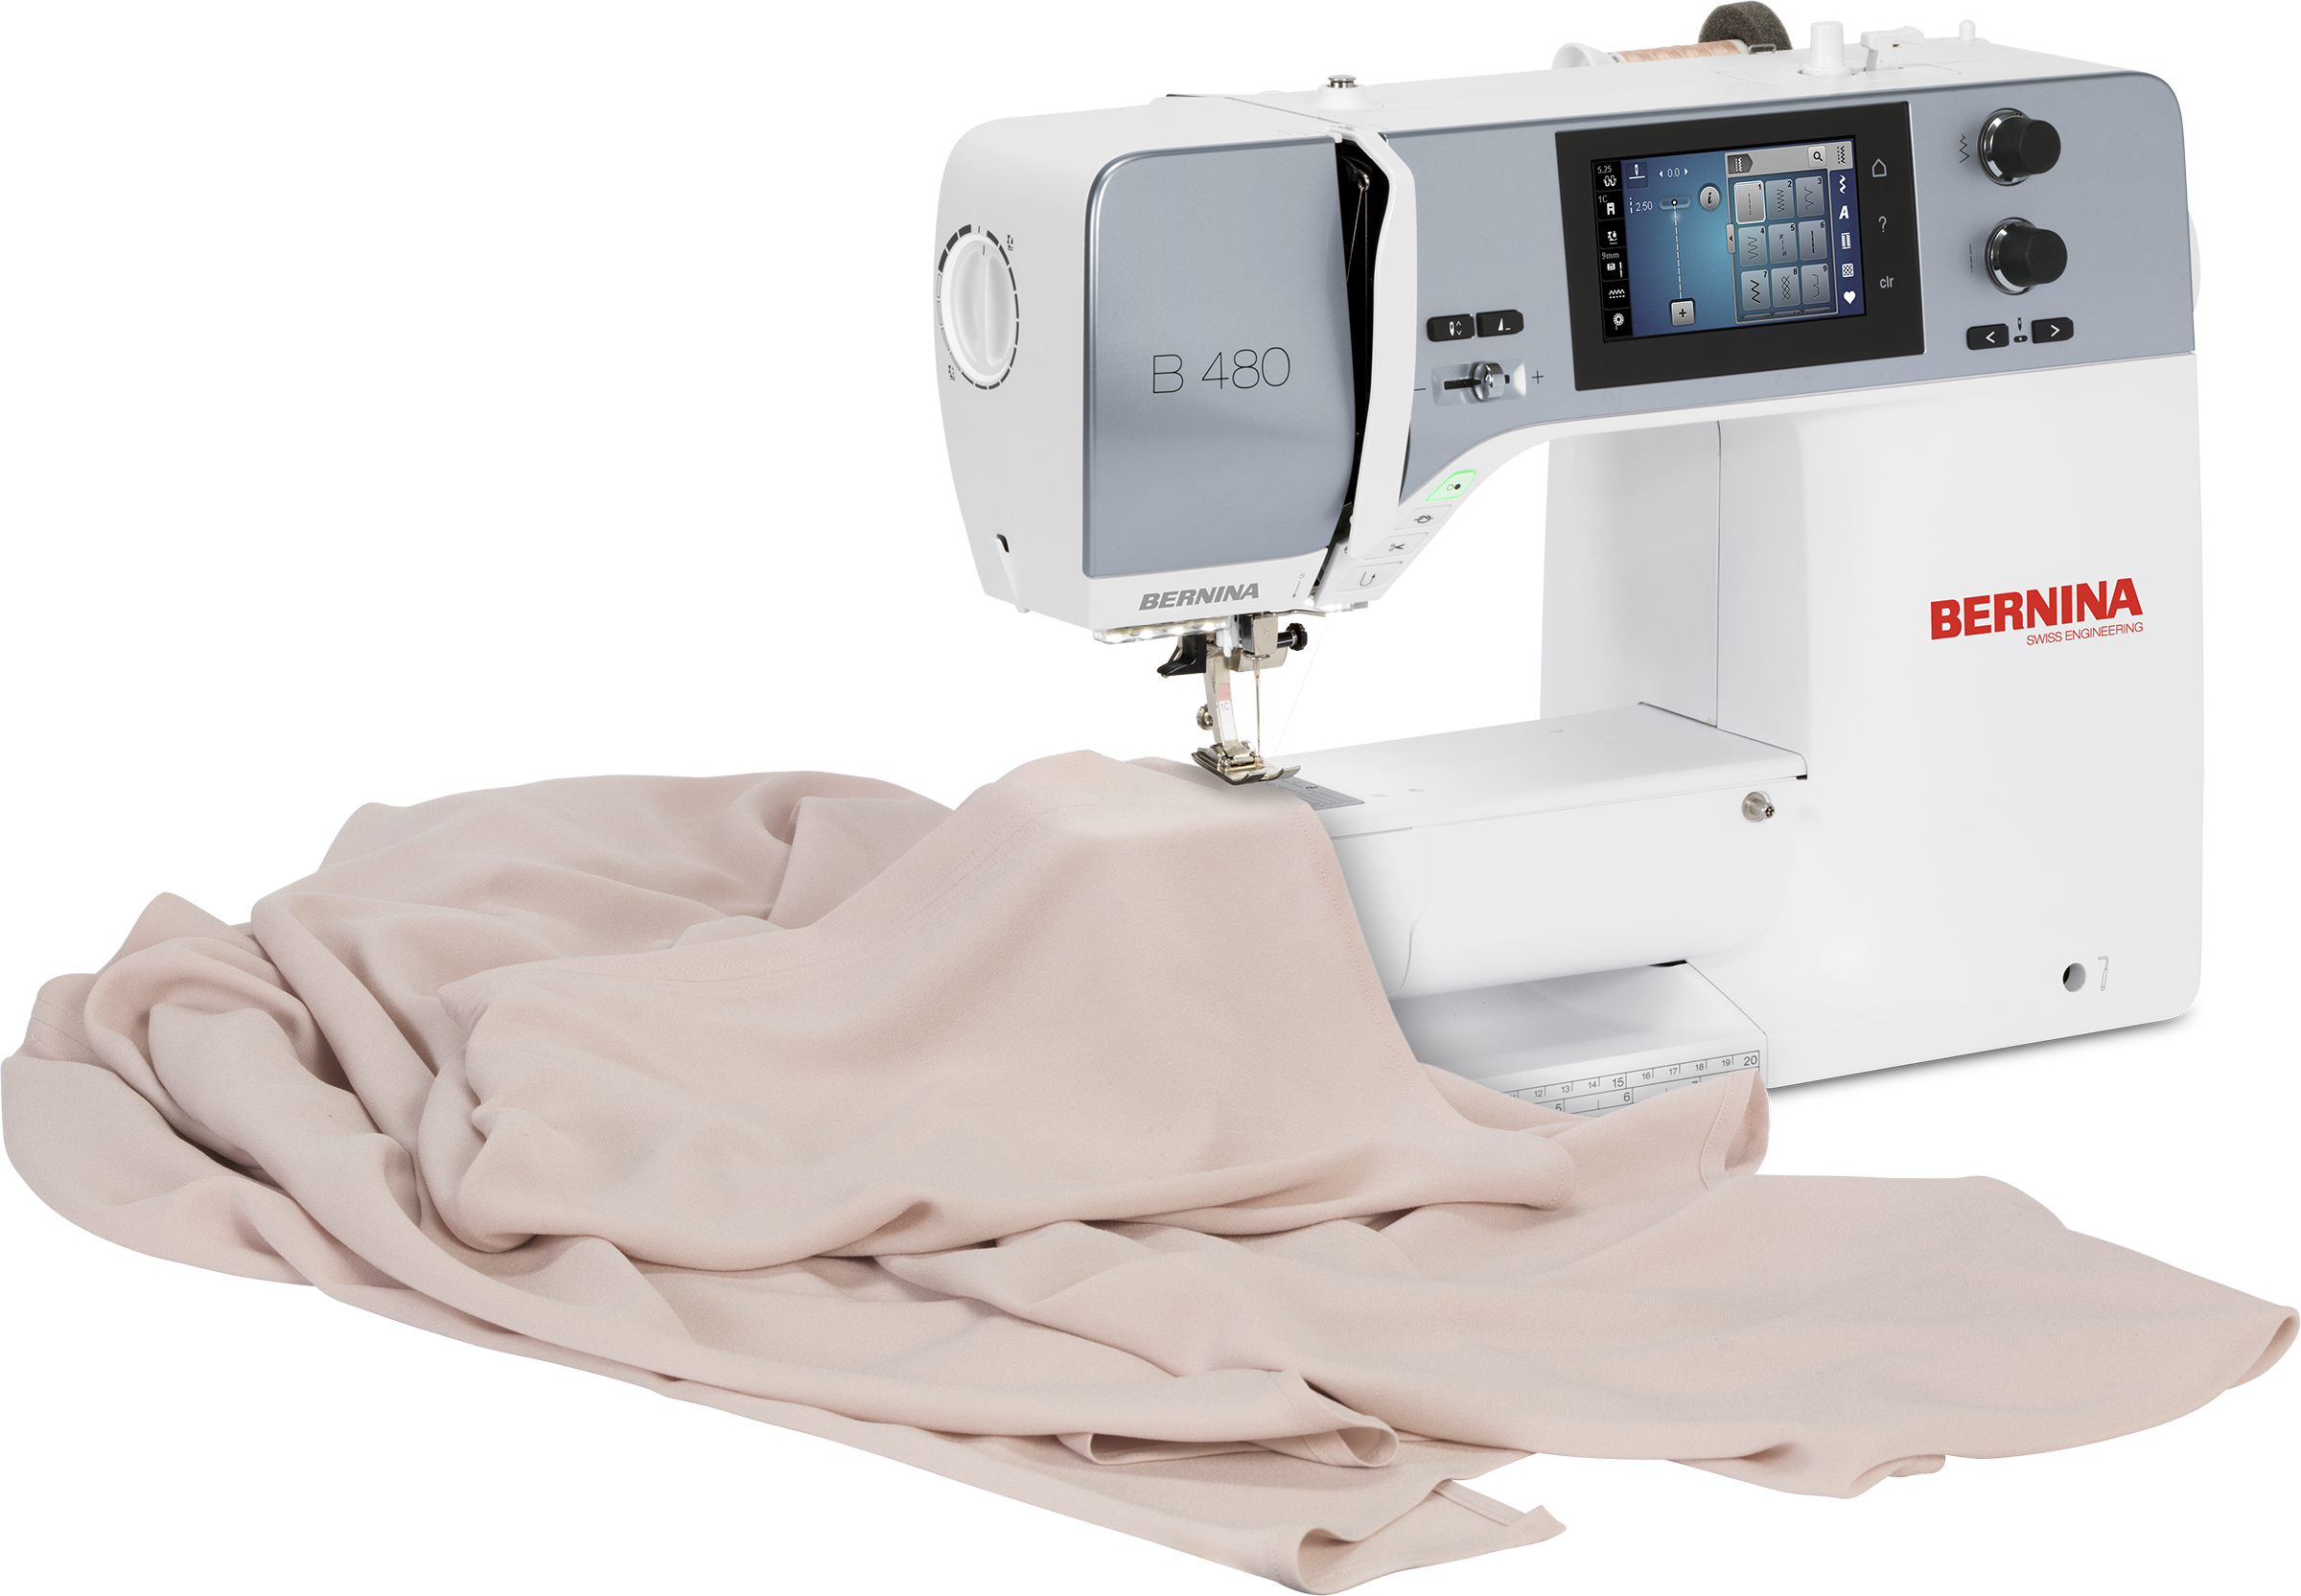 image of the BERNINA 480 Sewing Machine with a sewing project